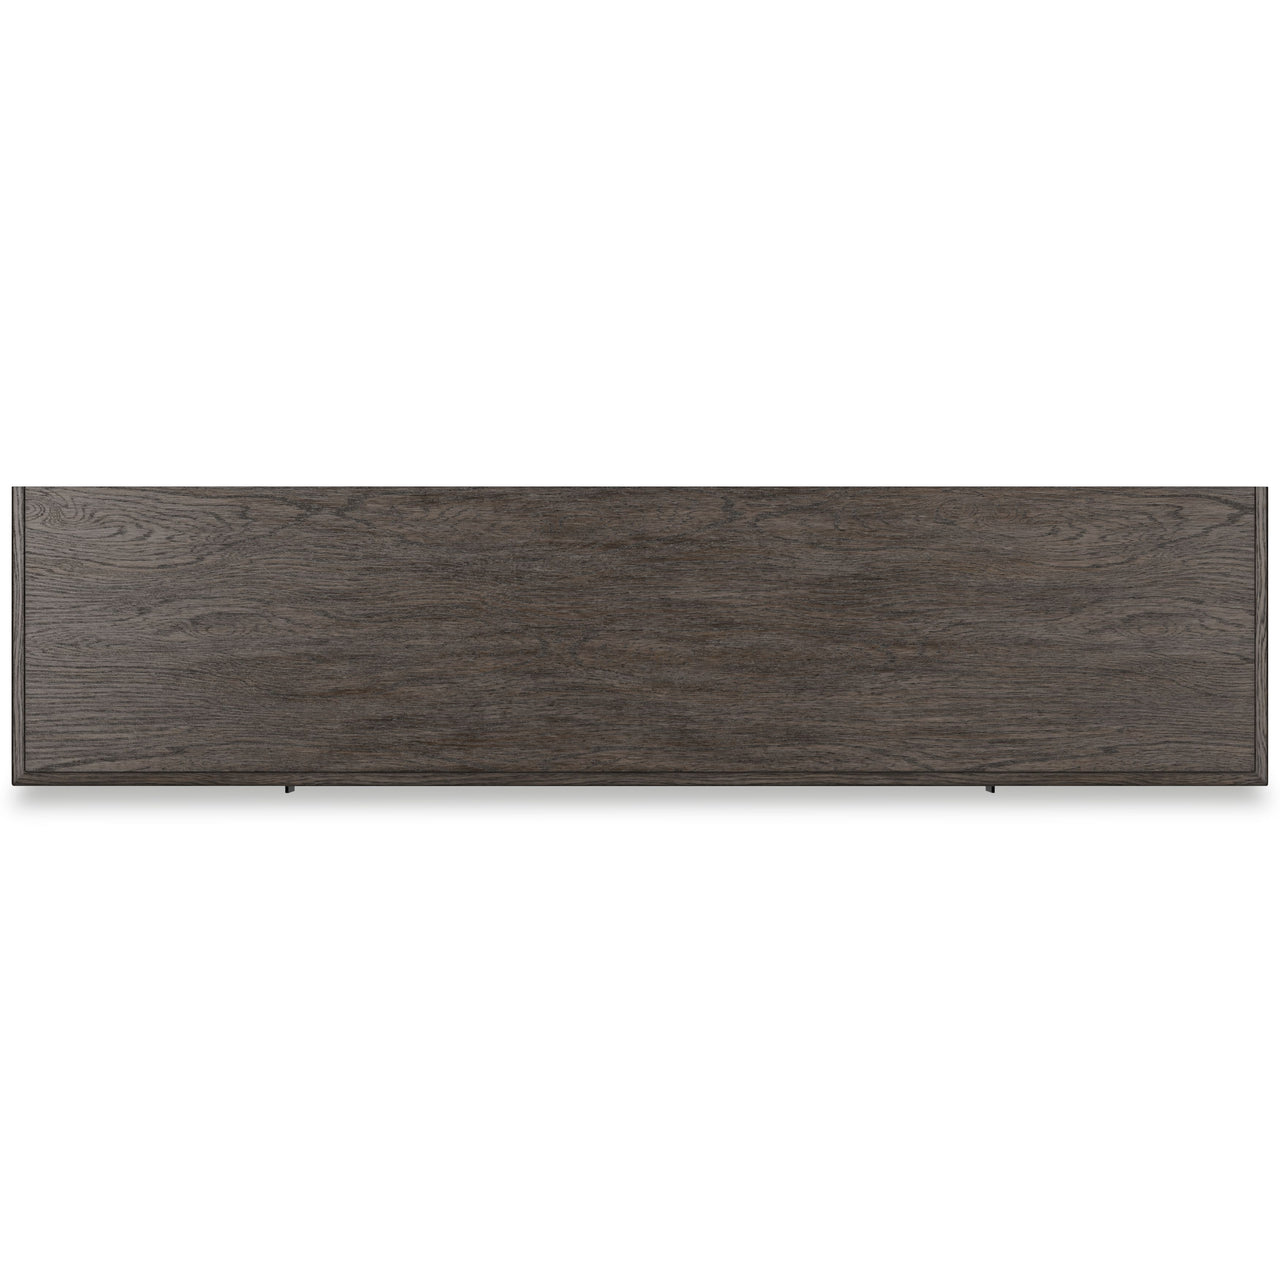 Montillan - Grayish Brown - 84" TV Stand With Electric Fireplace - Tony's Home Furnishings